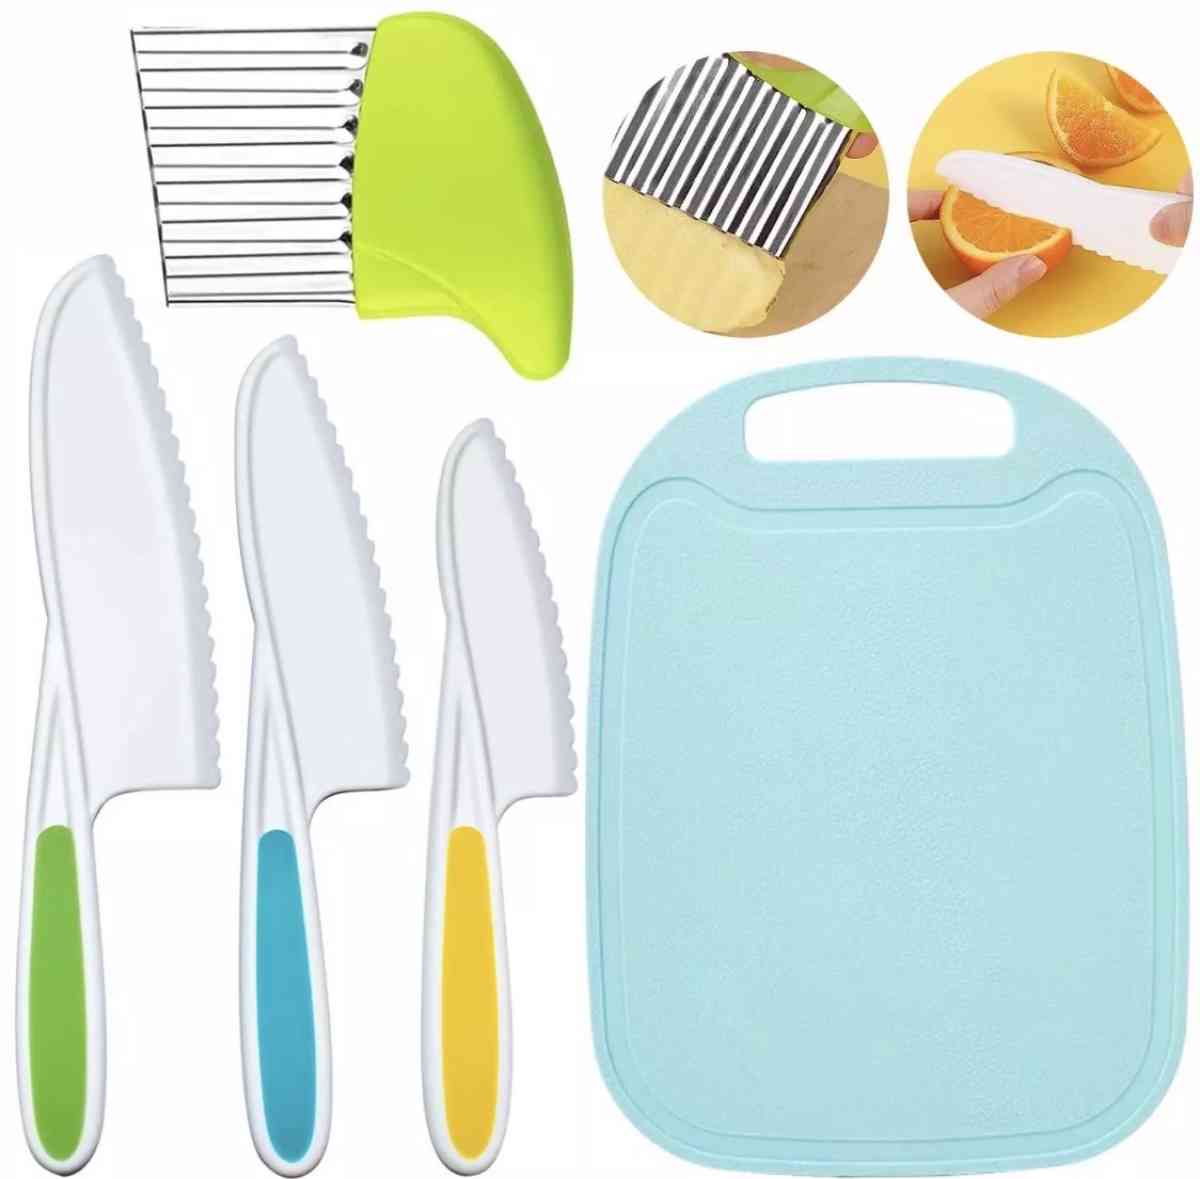 5 pcs kitchen cooking set for toddlers and kids safety knive